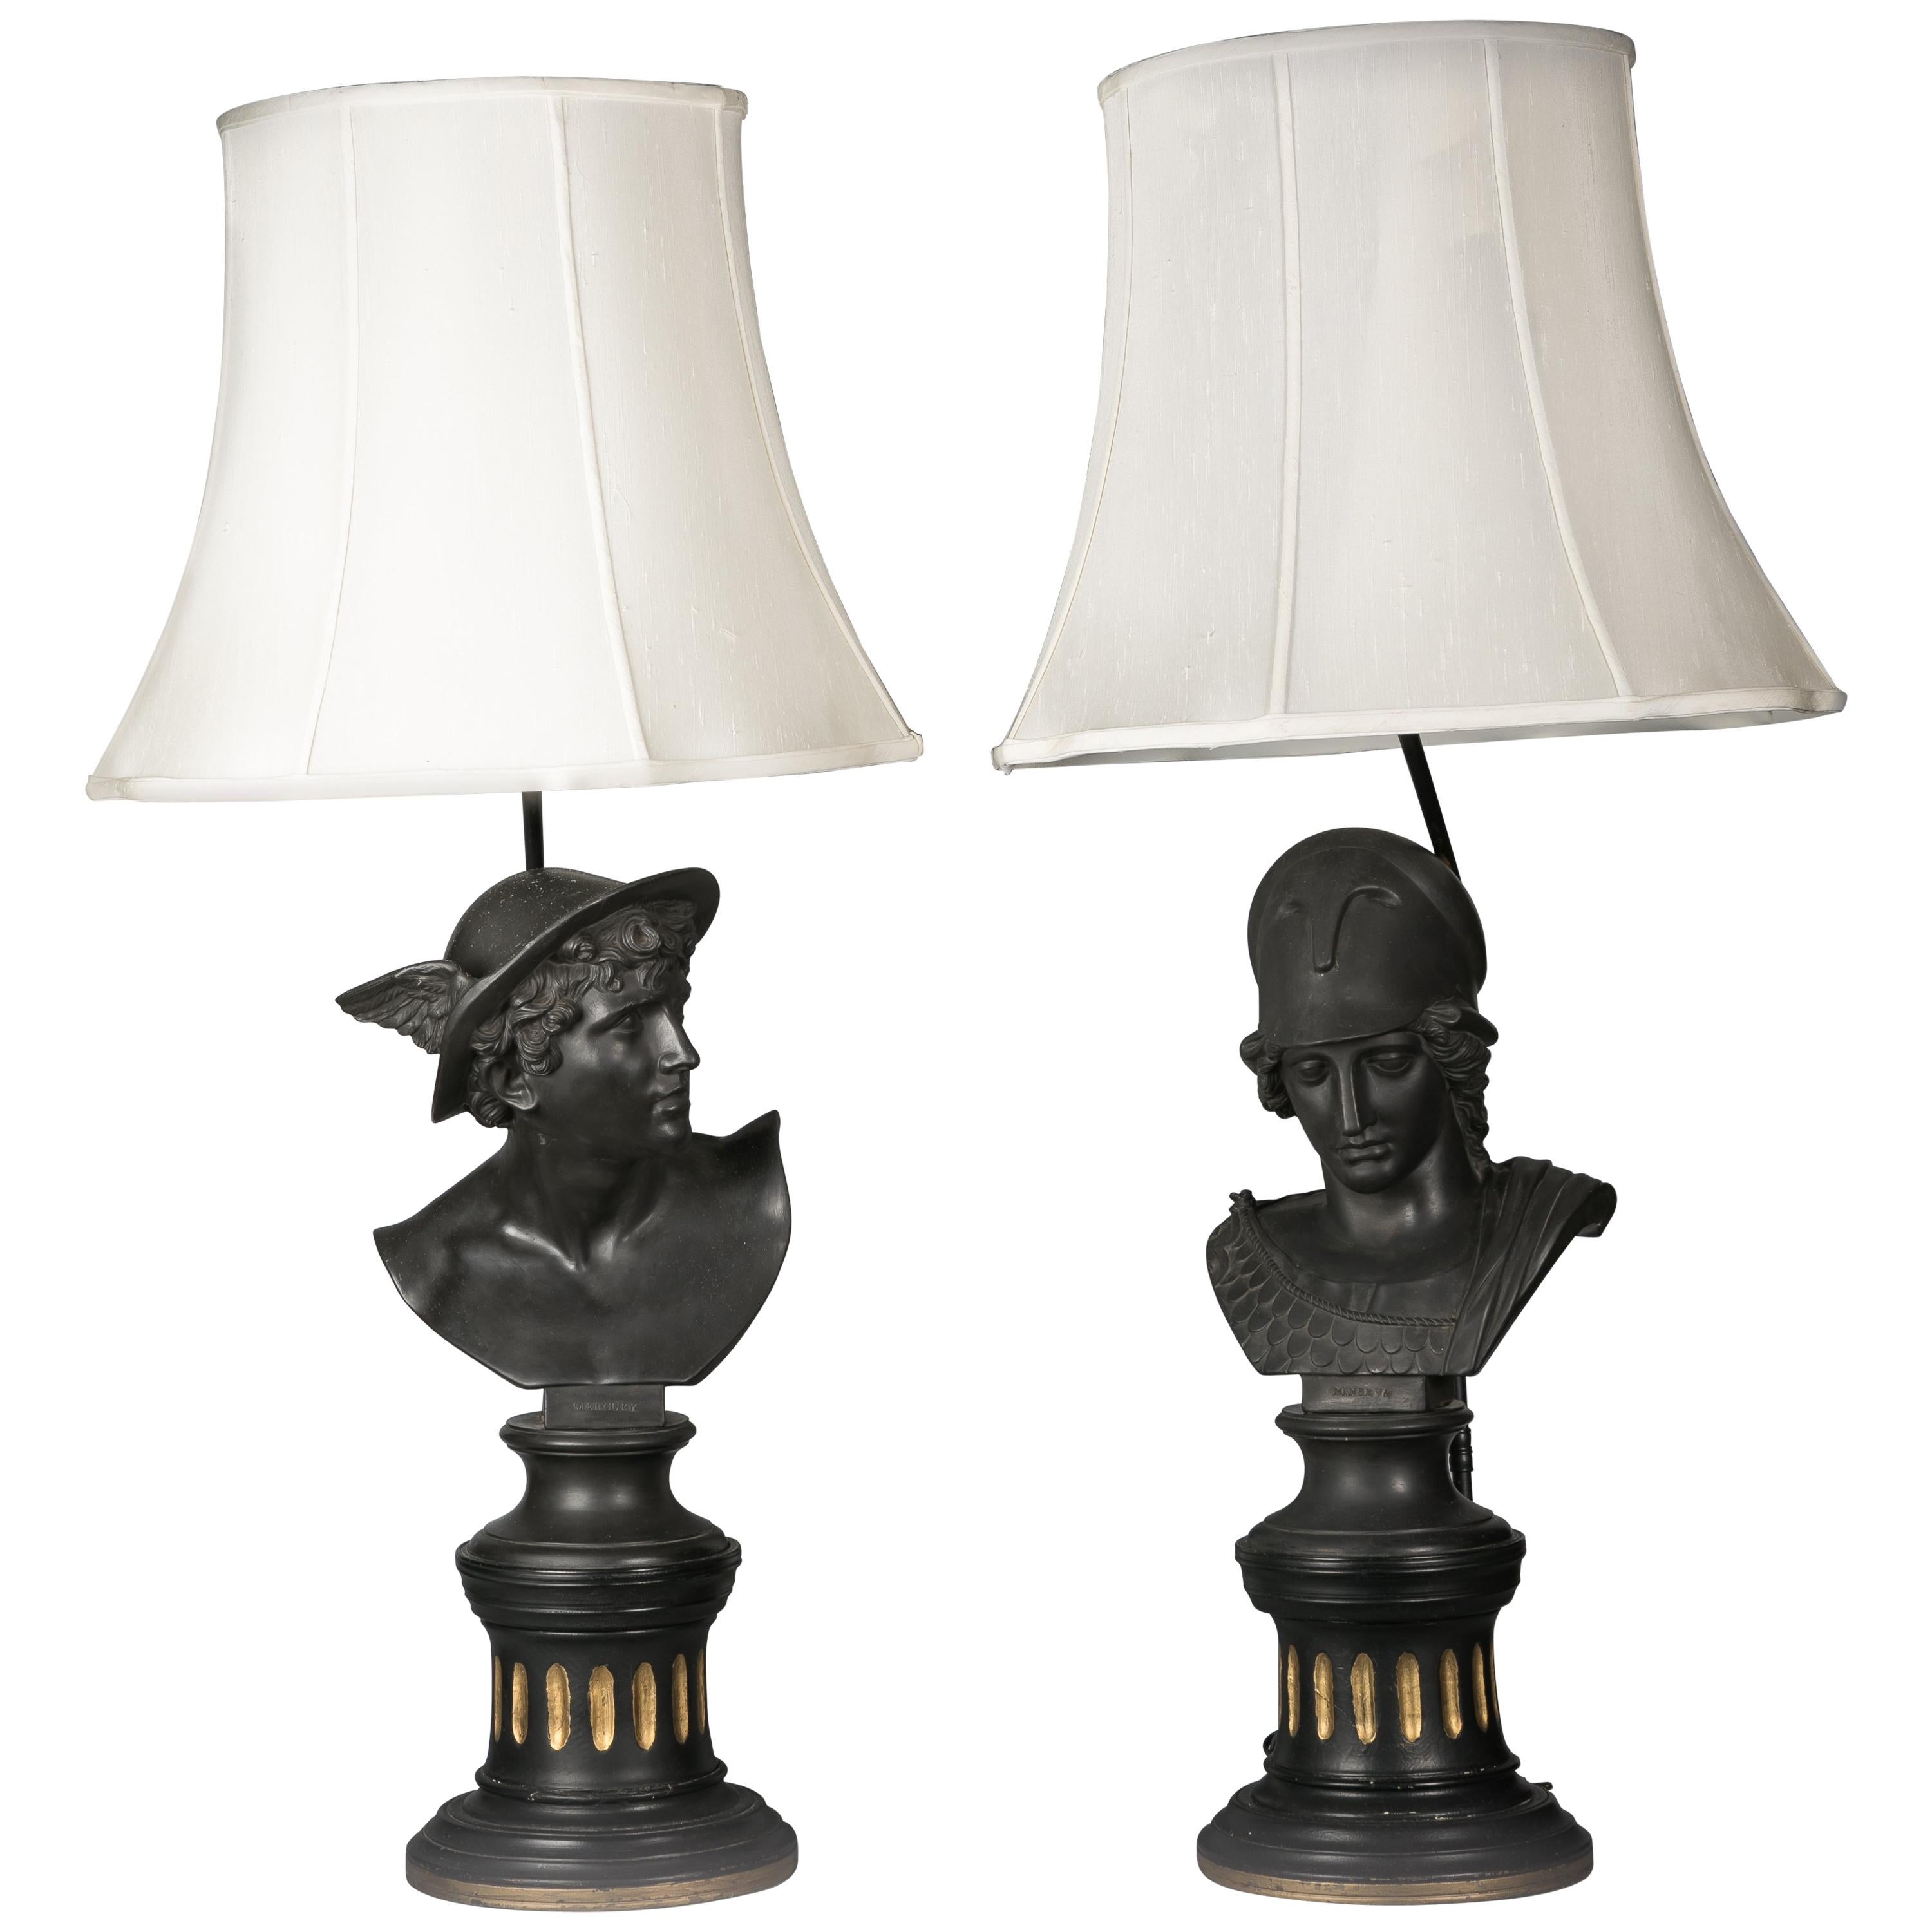 Pair of Wedgwood Basalt Busts Mounted as Lamps, 19th Century